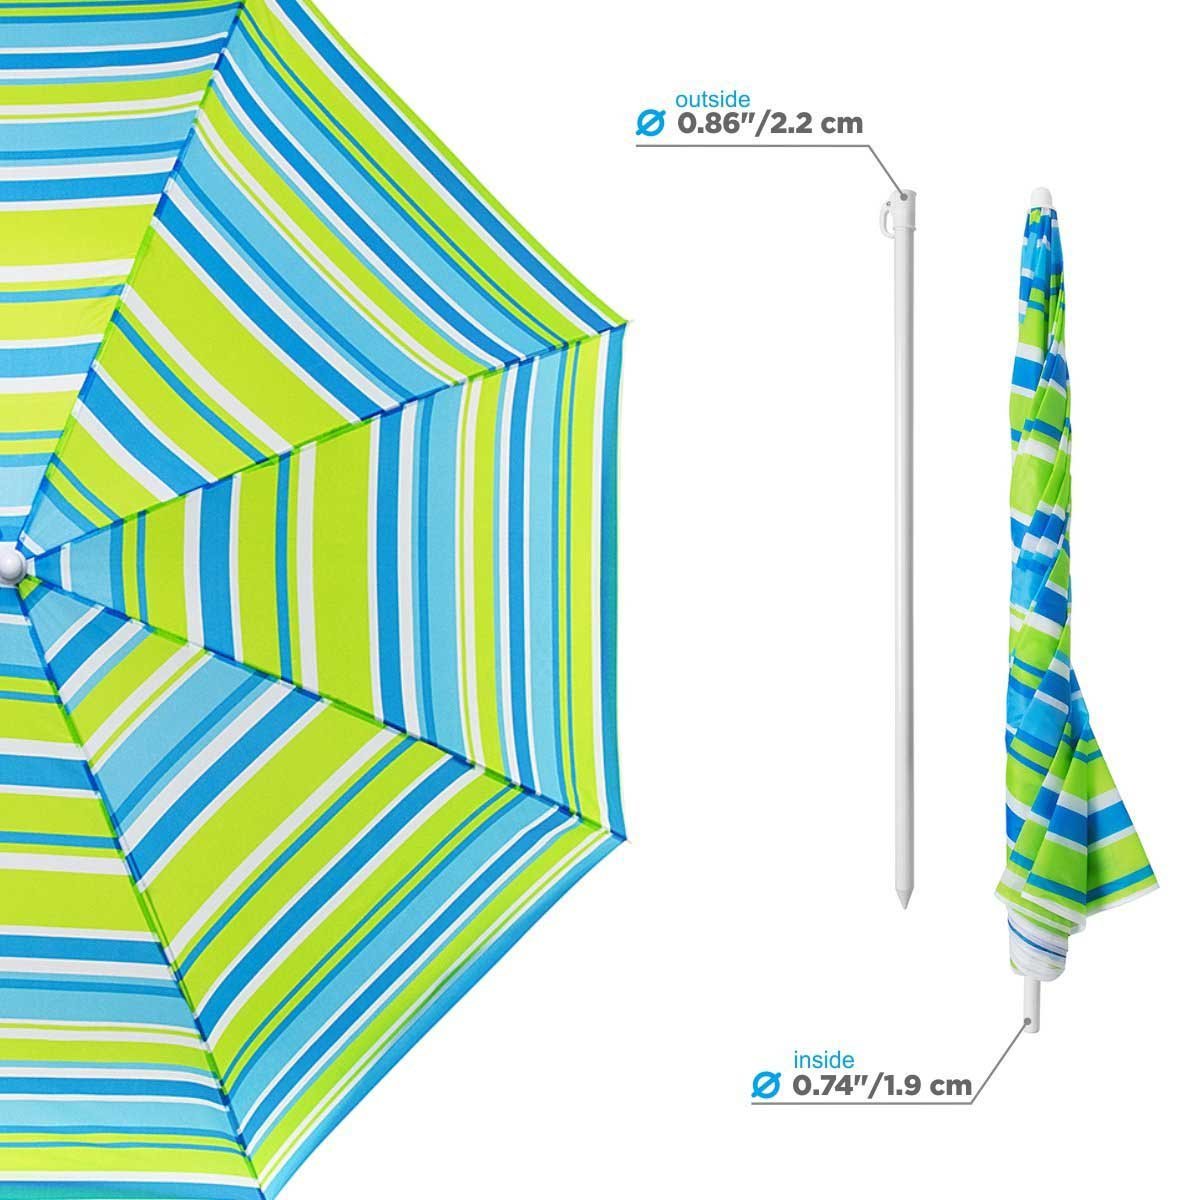 Sea-Green Folding Beach Umbrella is made of waterproof polyester 170T featuring UV protection